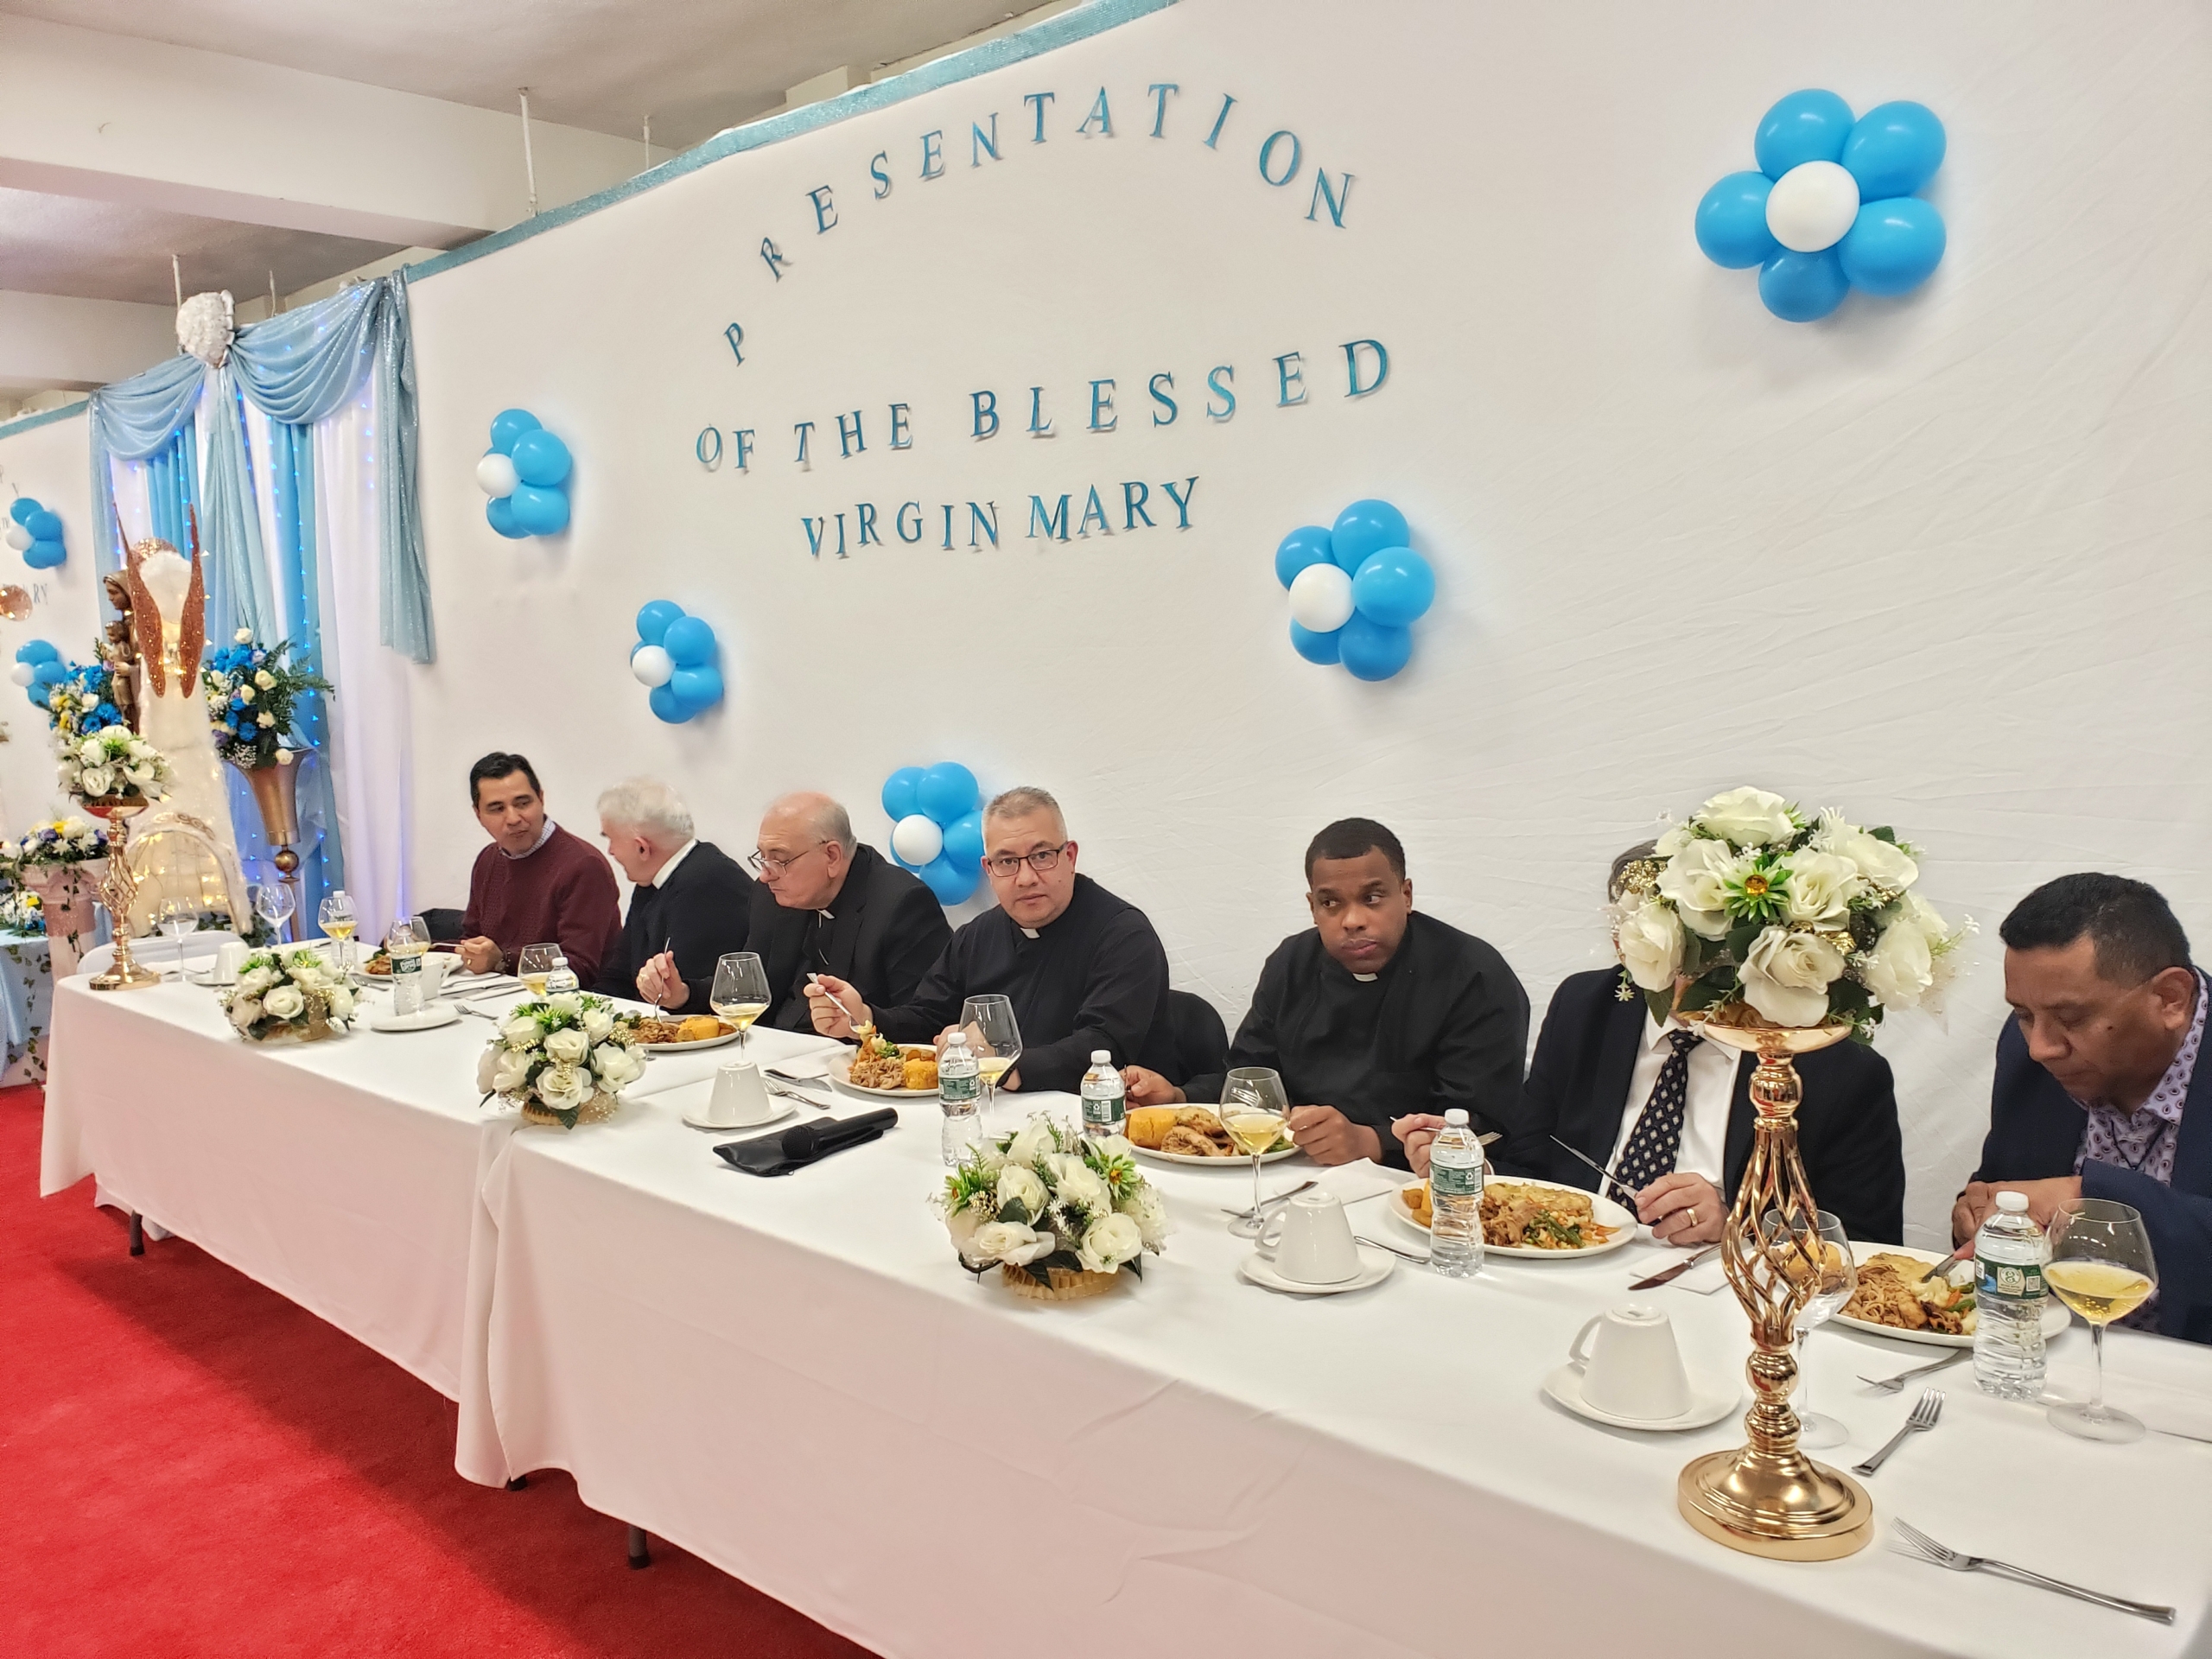 A group of people sitting at a long table.